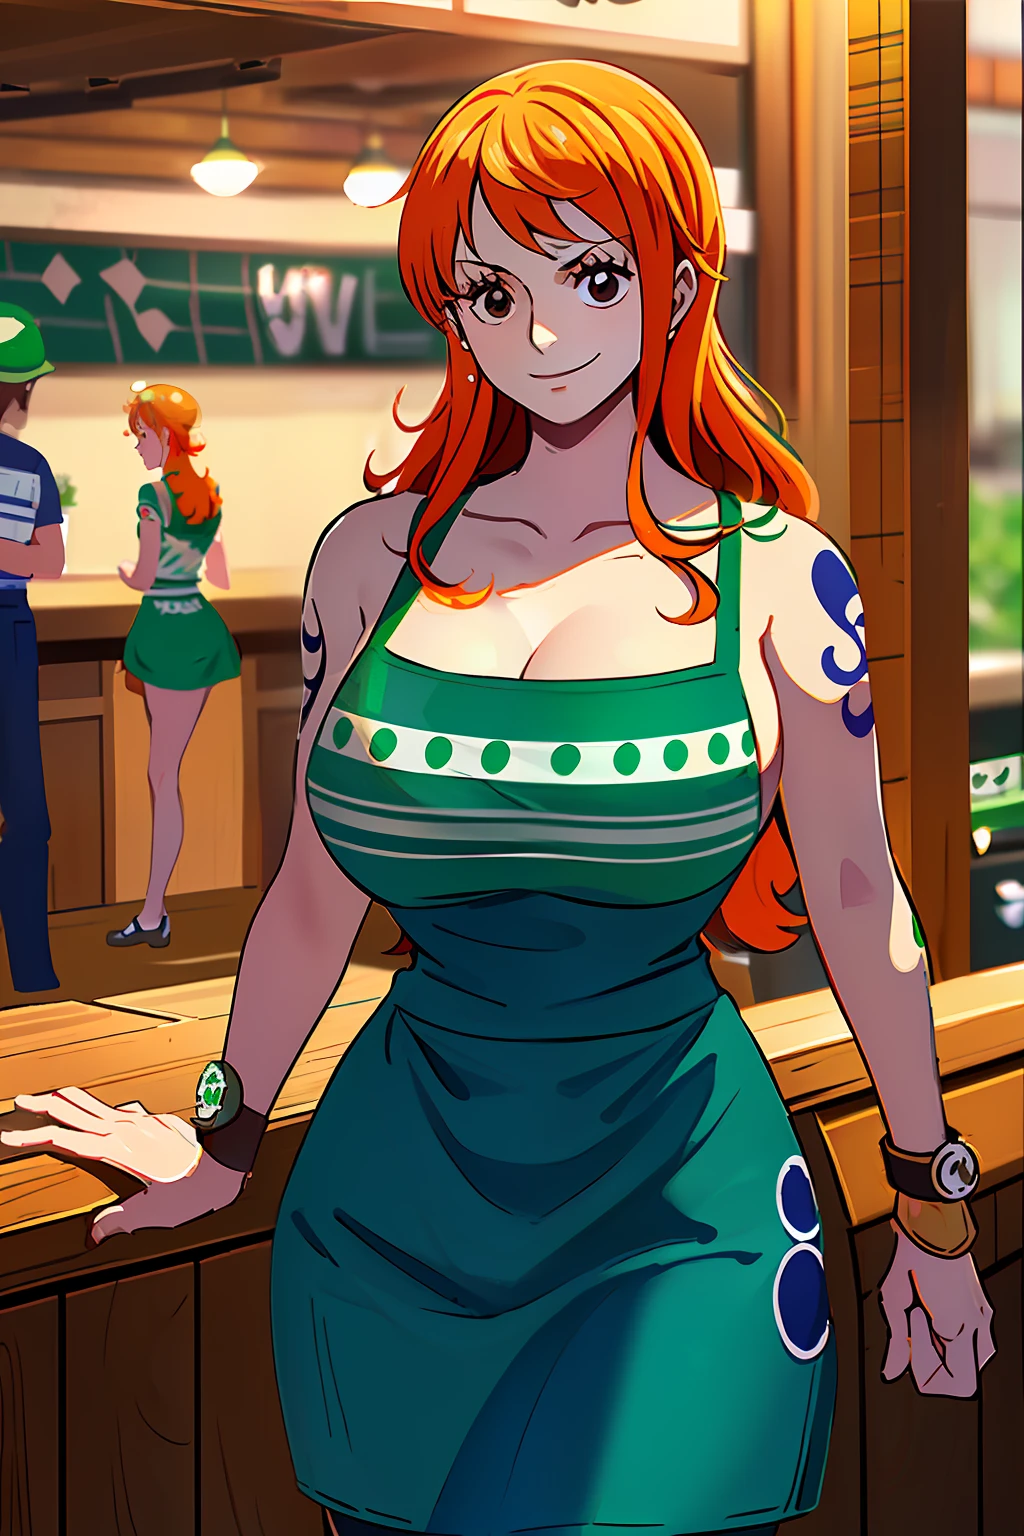 arafeel woman in 緑 エプロン standing in front of counter with coffee, starbucks エプロンs and visors, ( ウェイトレス ) 女の子, mysterious coffee shop 女の子, wearing an エプロン, RRダイナーの制服を着用, ( ( dark 緑, 作業着, エプロン, white waist エプロン and undershirt, white エプロン, sakimichan, #緑, 作業服, hanbok エプロン,黄色い髪